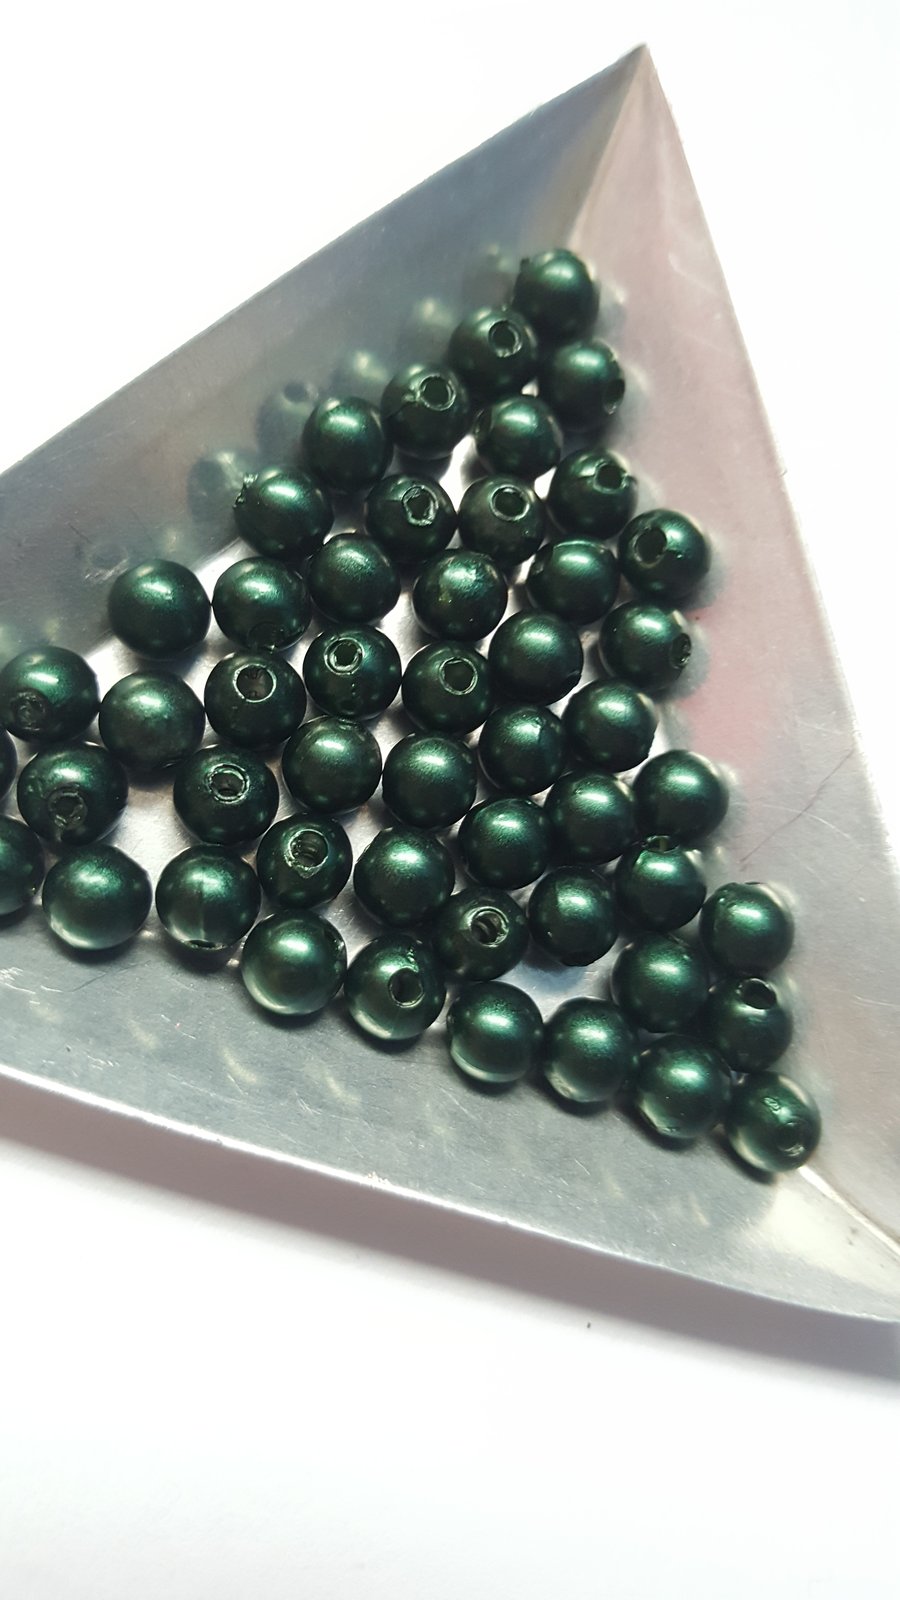 50 x Acrylic Pearl Beads - Round - 6mm - Green 